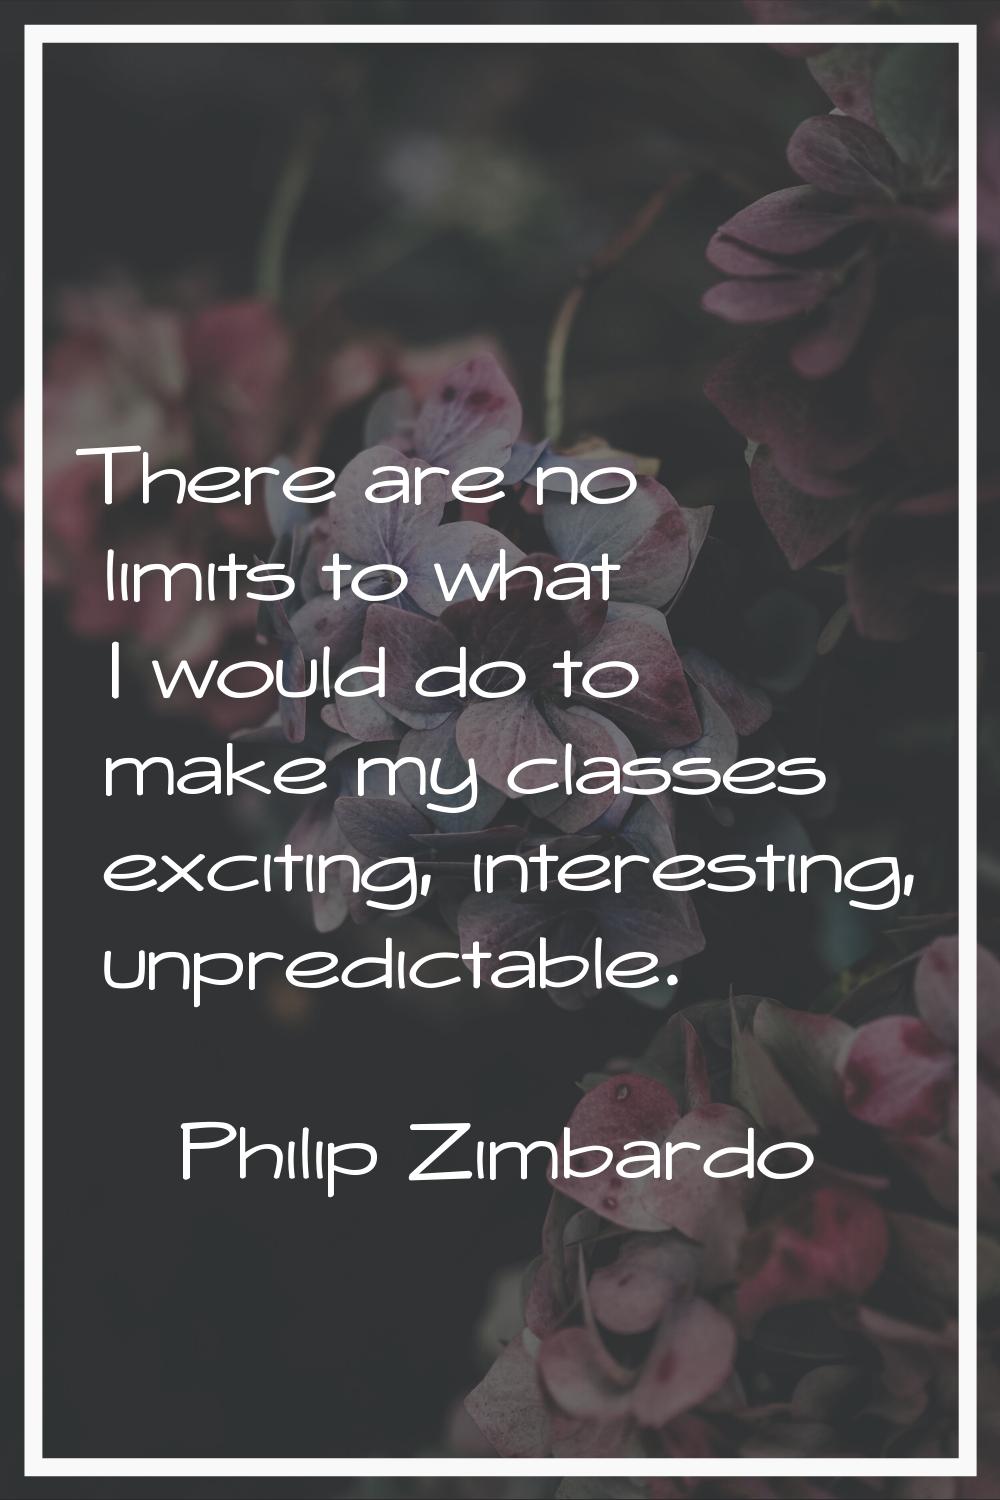 There are no limits to what I would do to make my classes exciting, interesting, unpredictable.